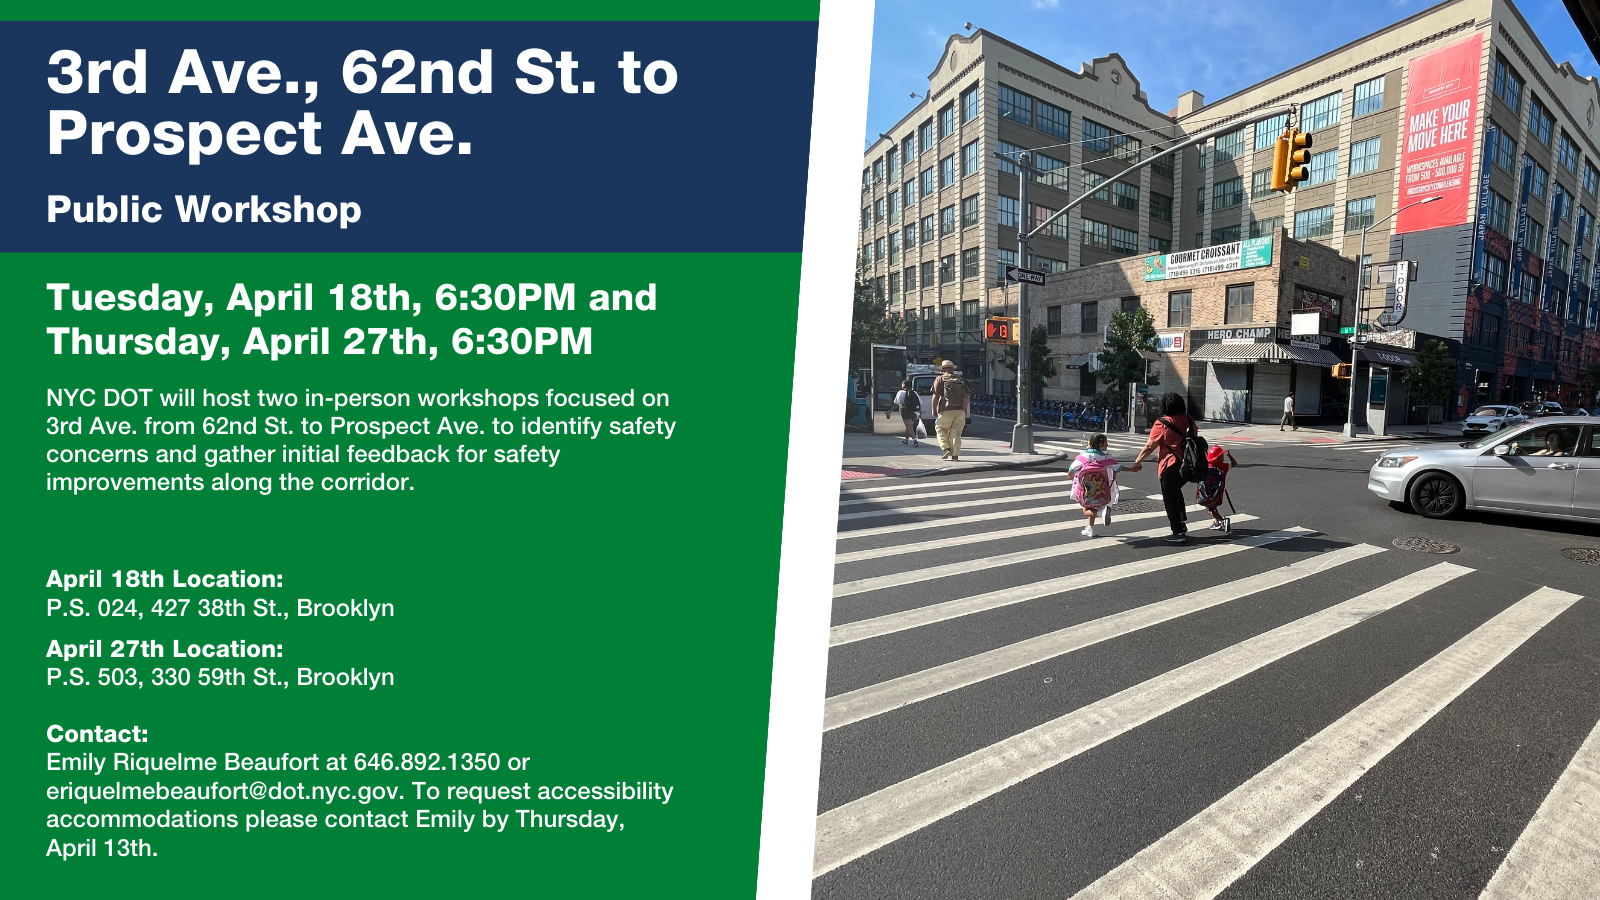 Flyer advertising 3rd Ave Safety Improvement community workshop, April 18 and April 27